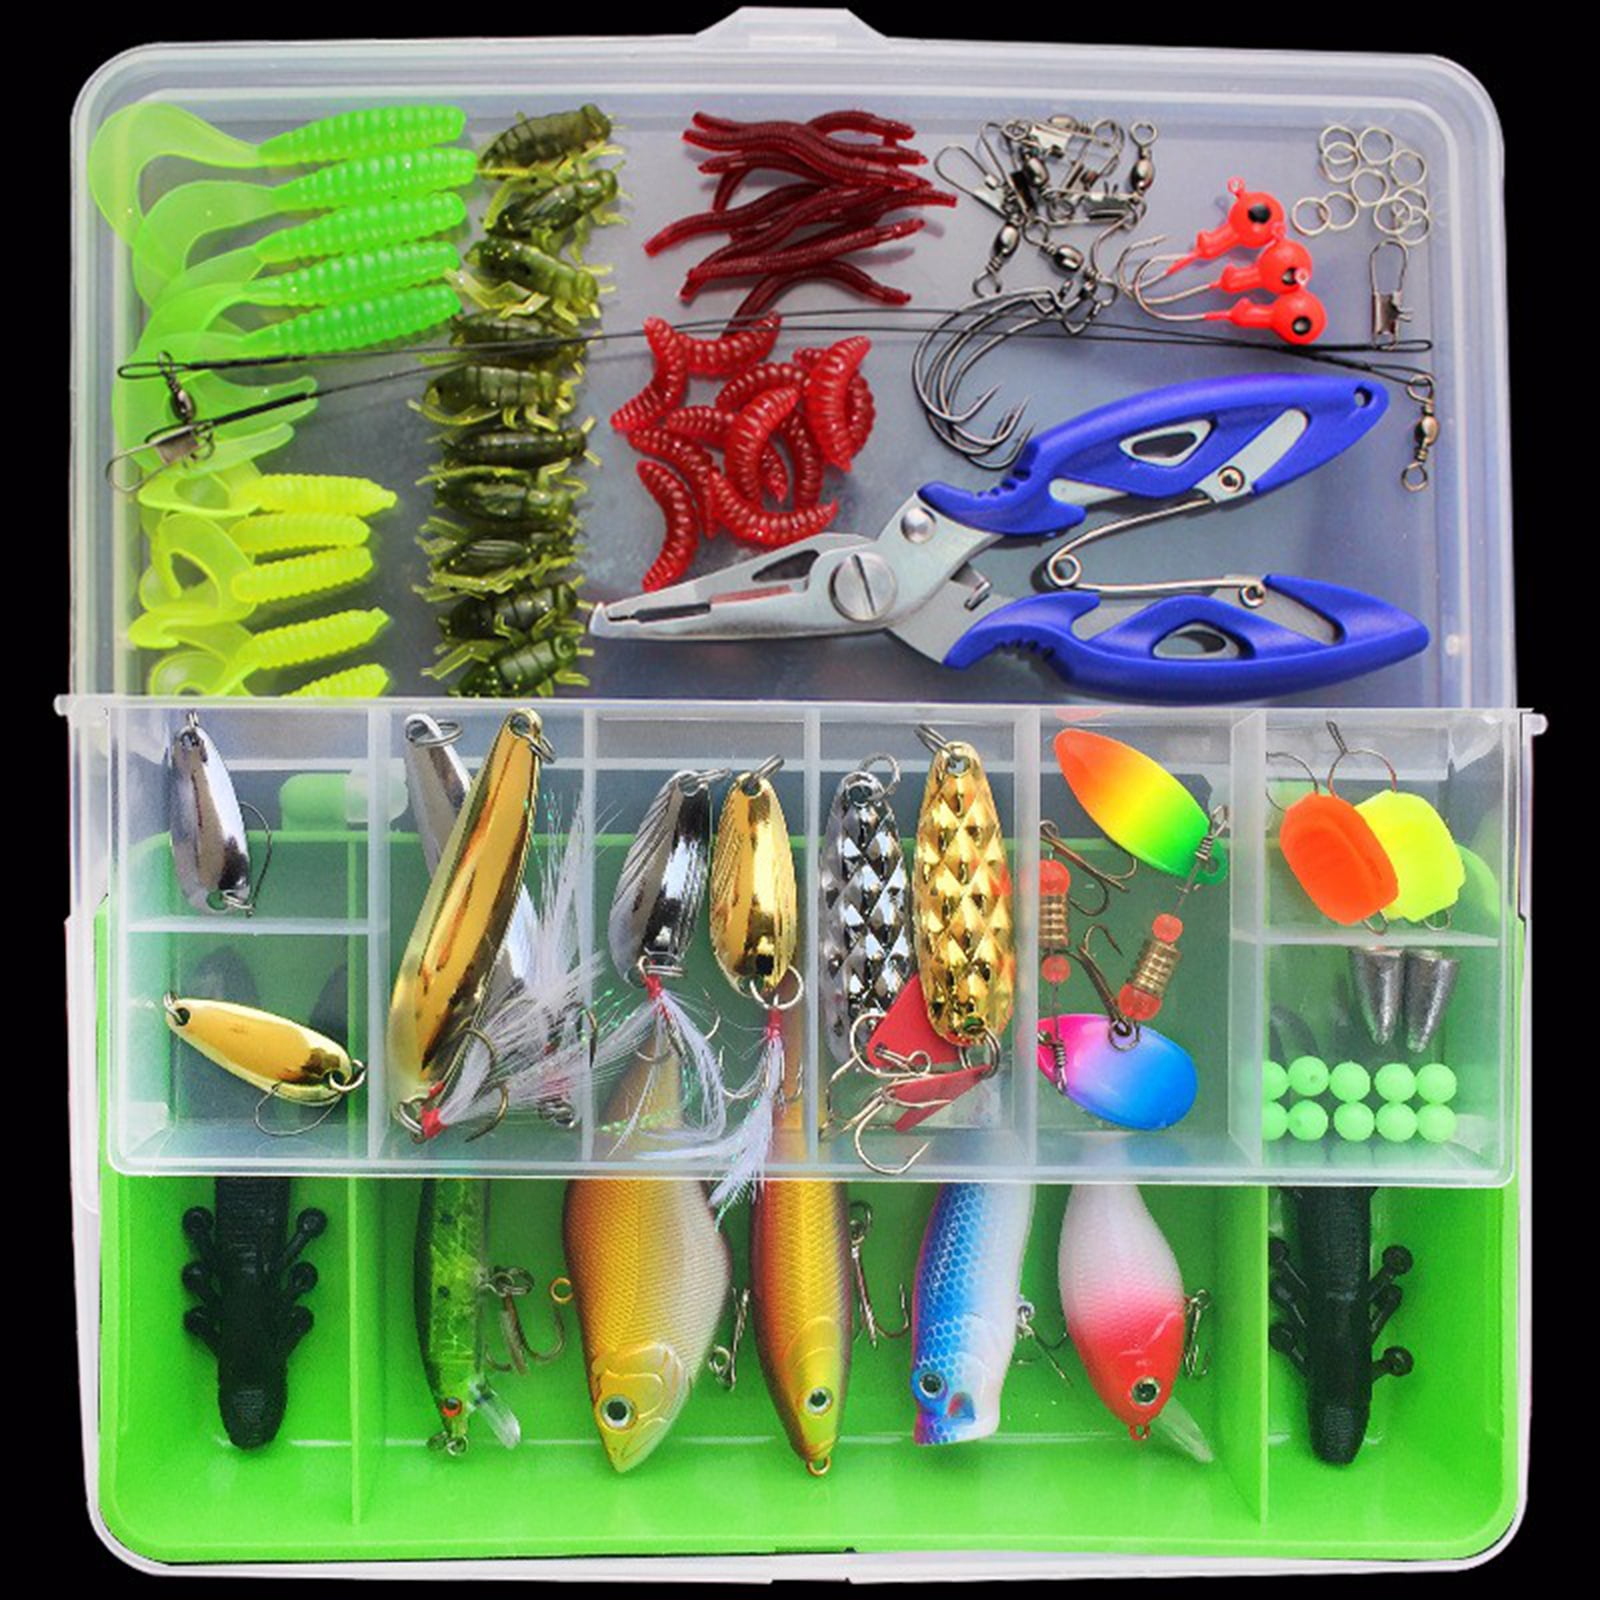 Rubber Soft Tiddler Bass Fishing Plastic Lure Bionic Bait Tackle Hook Outdoor DI